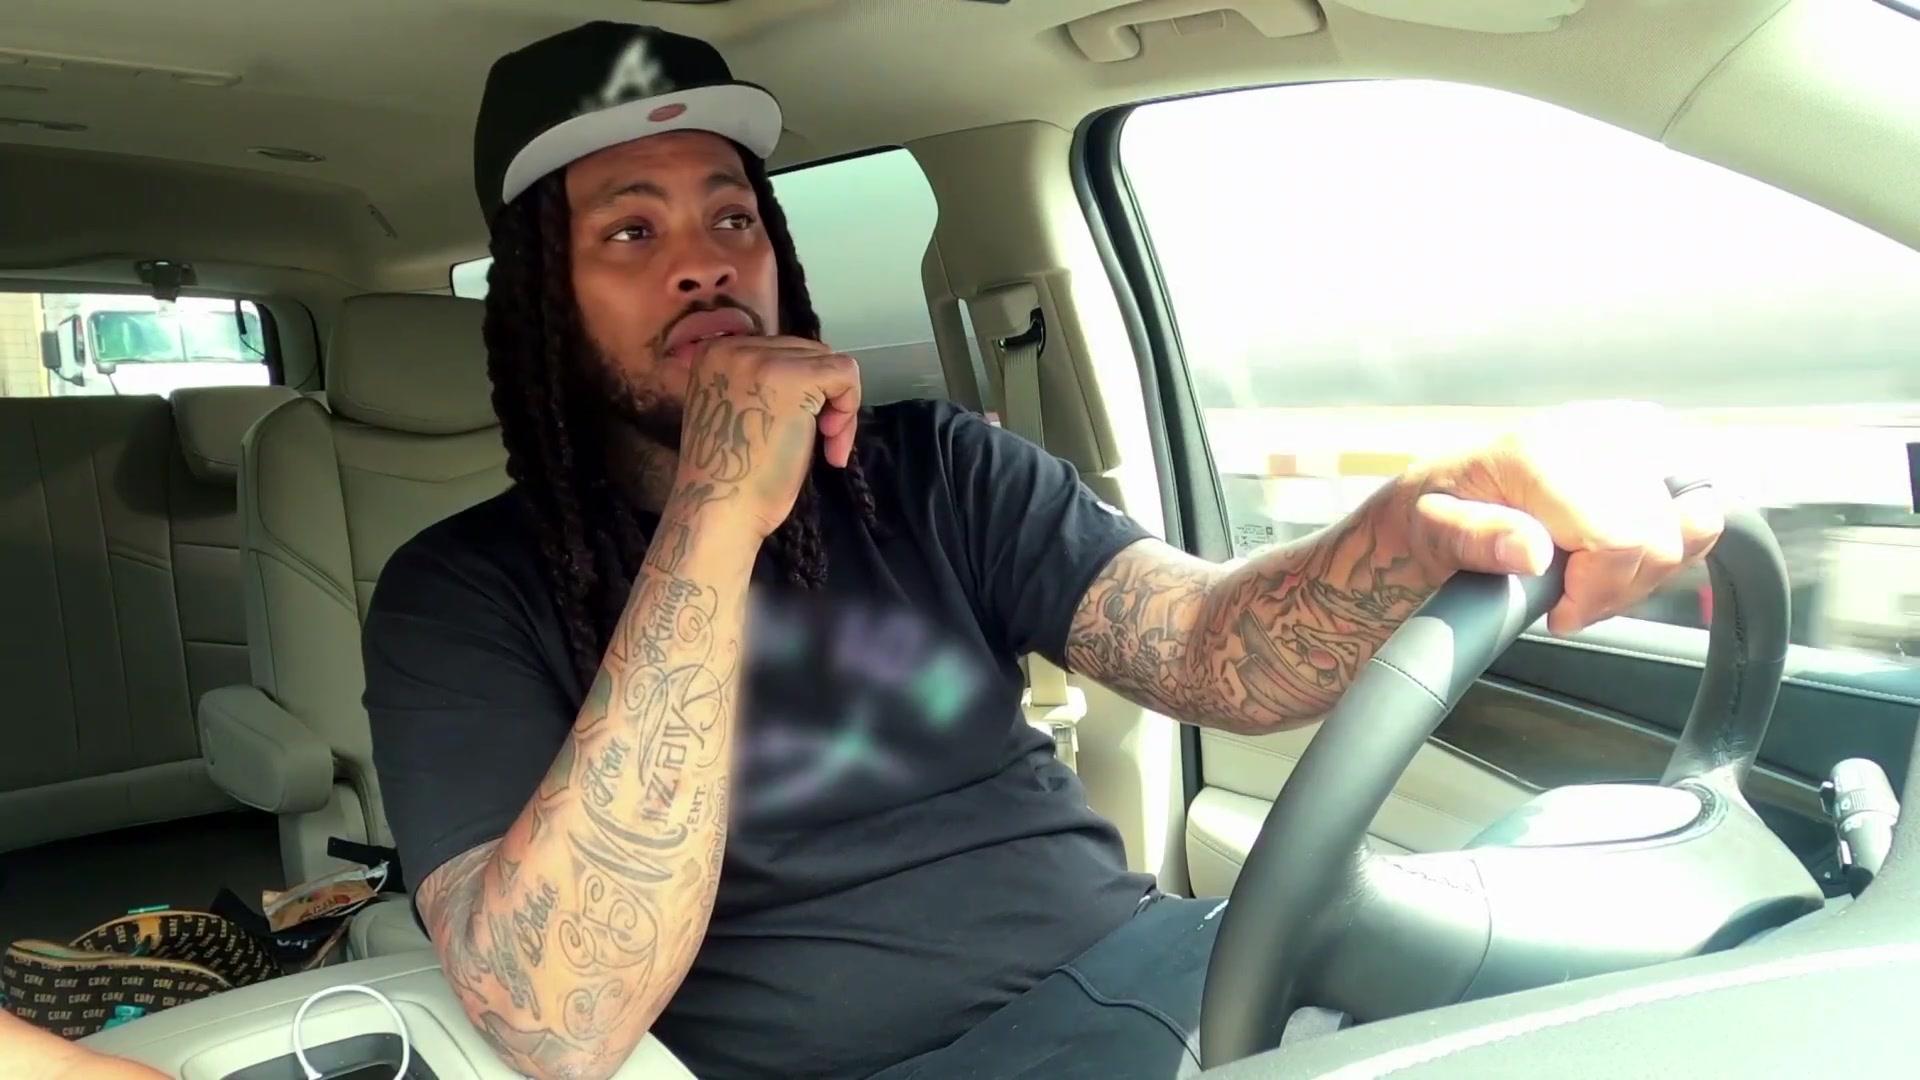 Watch 'I Don't Wanna Go to Counseling!' | Waka & Tammy Video Extras